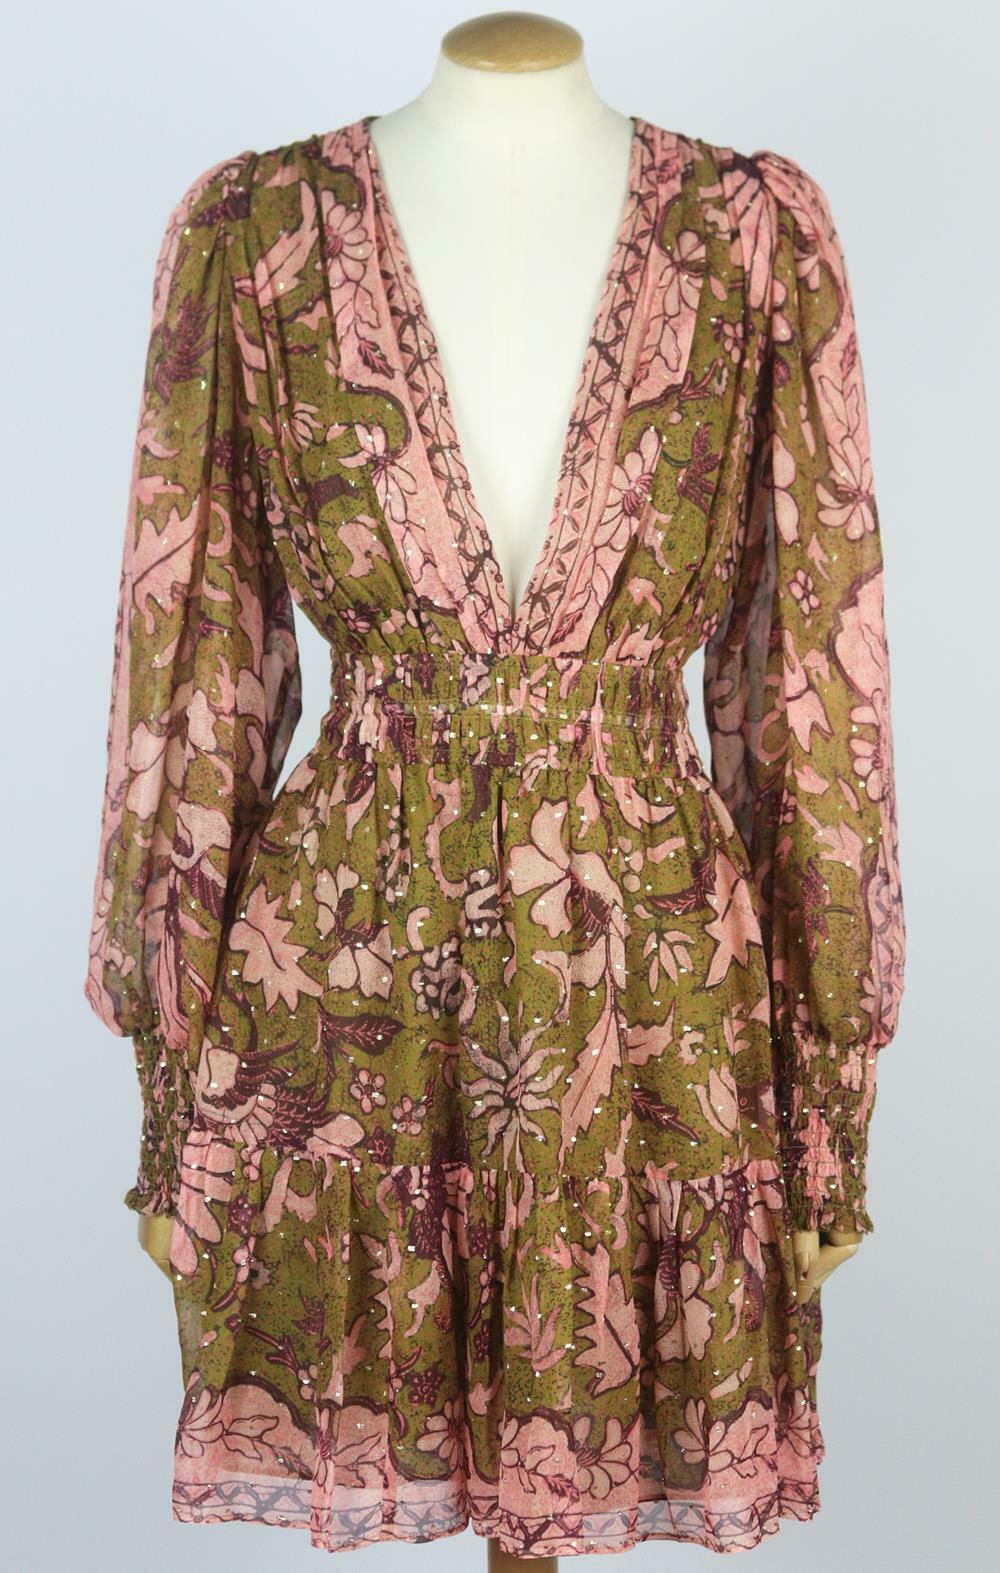 Ulla Johnson looks to Native American artist T.C. Cannon's work to inform the collection, and the influence is obvious in this 'Rosetta' mini dress, it's made from stretch-silk fil coupé in an intricate motif and has an elasticated, nipped-in waist